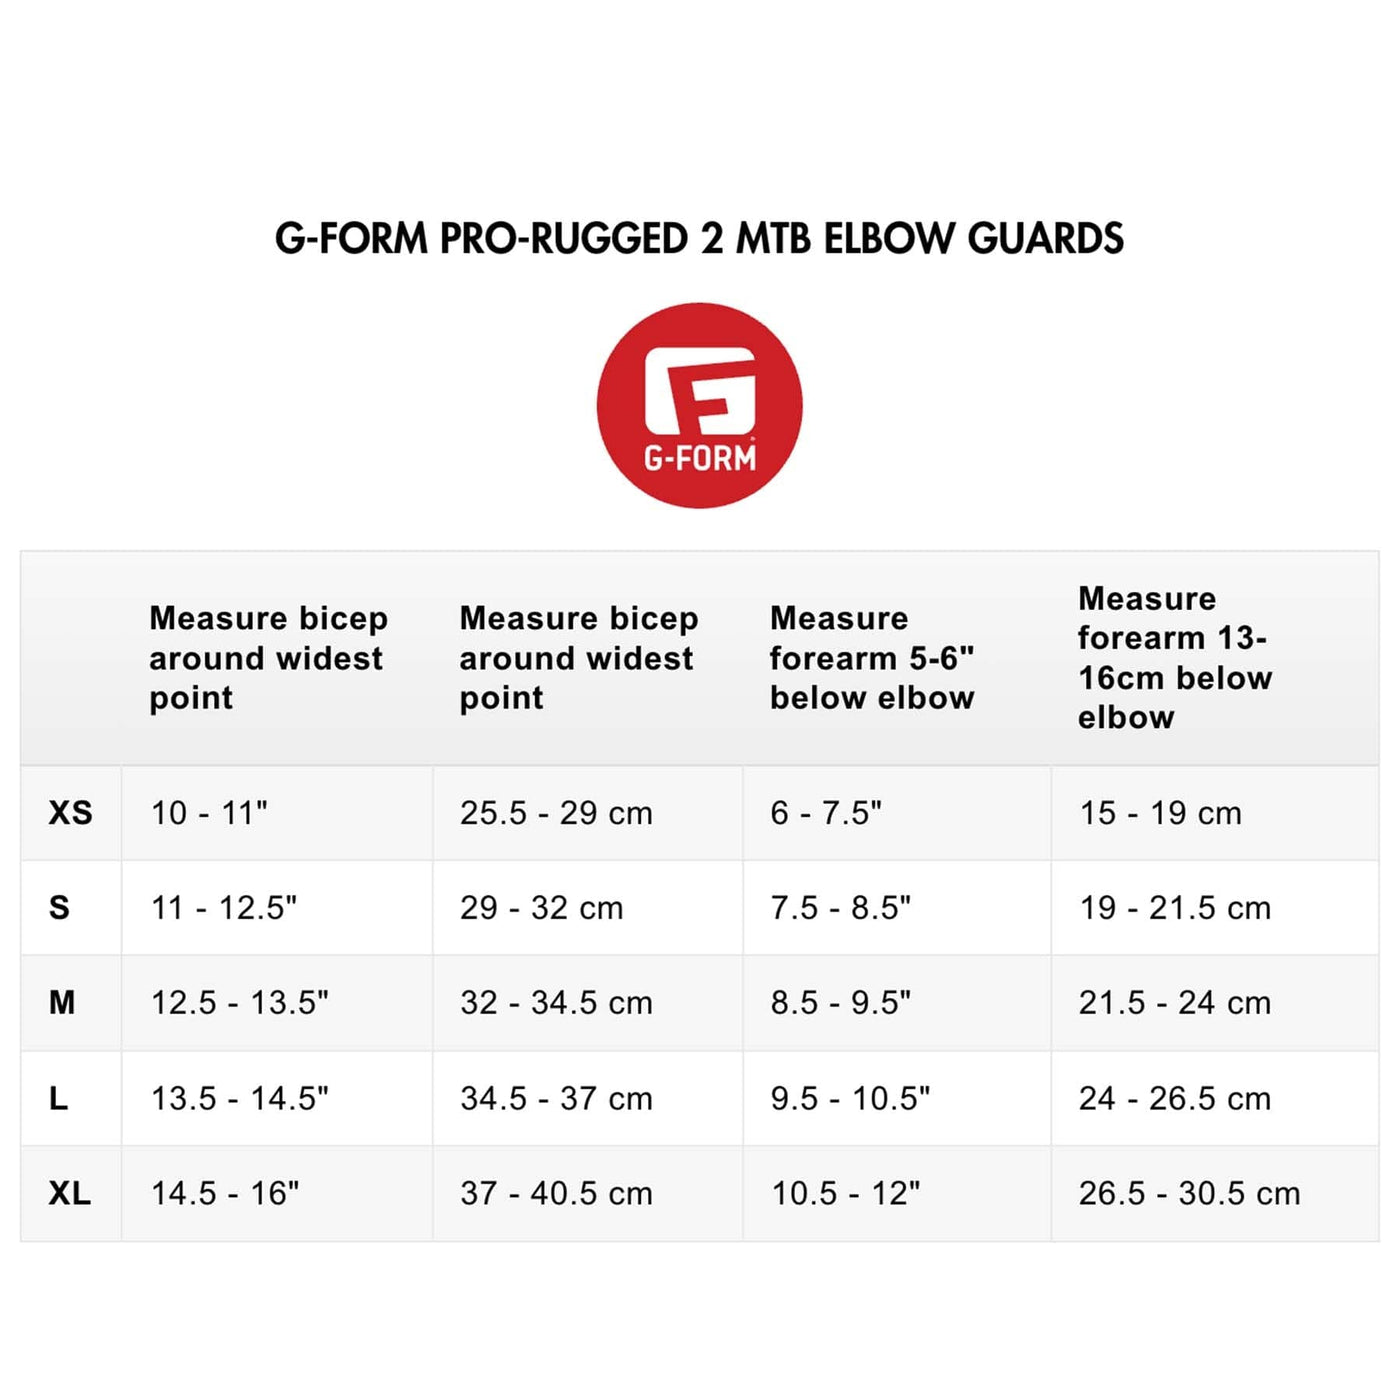 G-FORM PRO-RUGGED 2 MTB ELBOW GUARDS SIZE CHART.jpg